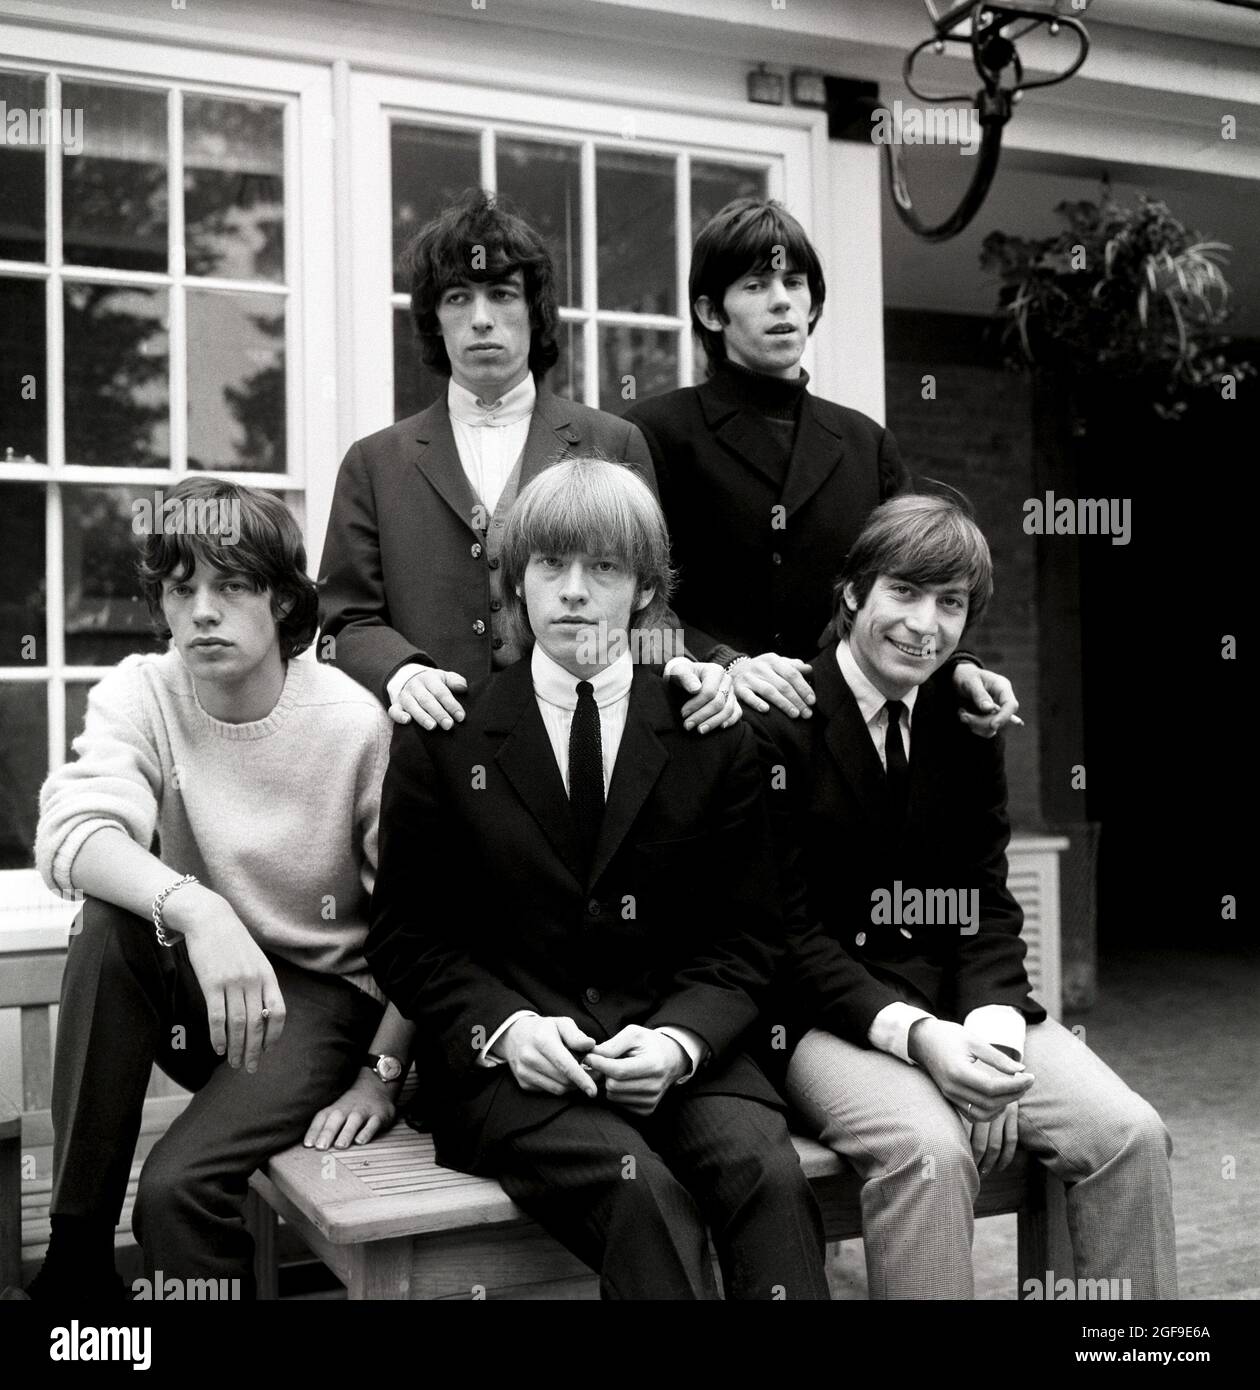 File photo dated 12/09/64 of The Rolling Stones, (left to right), Mick Jagger, Bill Wyman, Brian Jones, Keith Richards and Charlie Watts. The Rolling Stones drummer Charlie Watts has died at the age of 80, his London publicist Bernard Doherty said in a statement to the PA news agency. Issue date: Tuesday August 24, 2021. Stock Photo